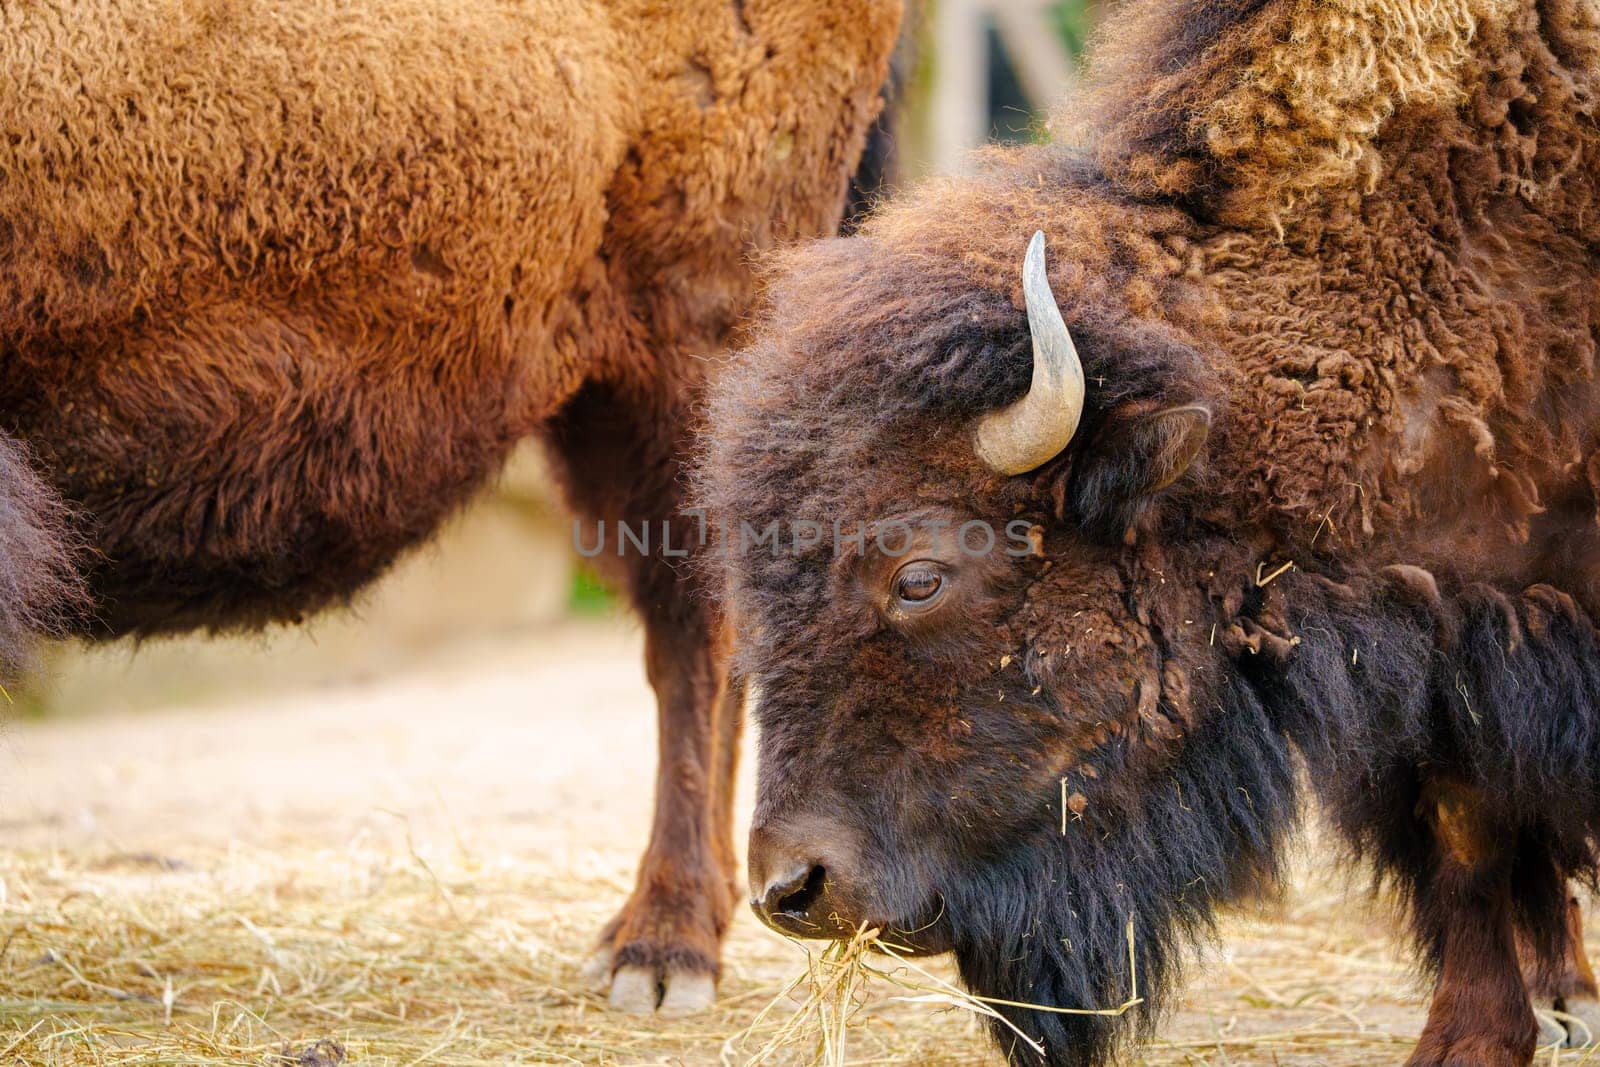 Bison Close-up: Eating Dry Grass in Natural Habitat - Wildlife Photography Print by PhotoTime